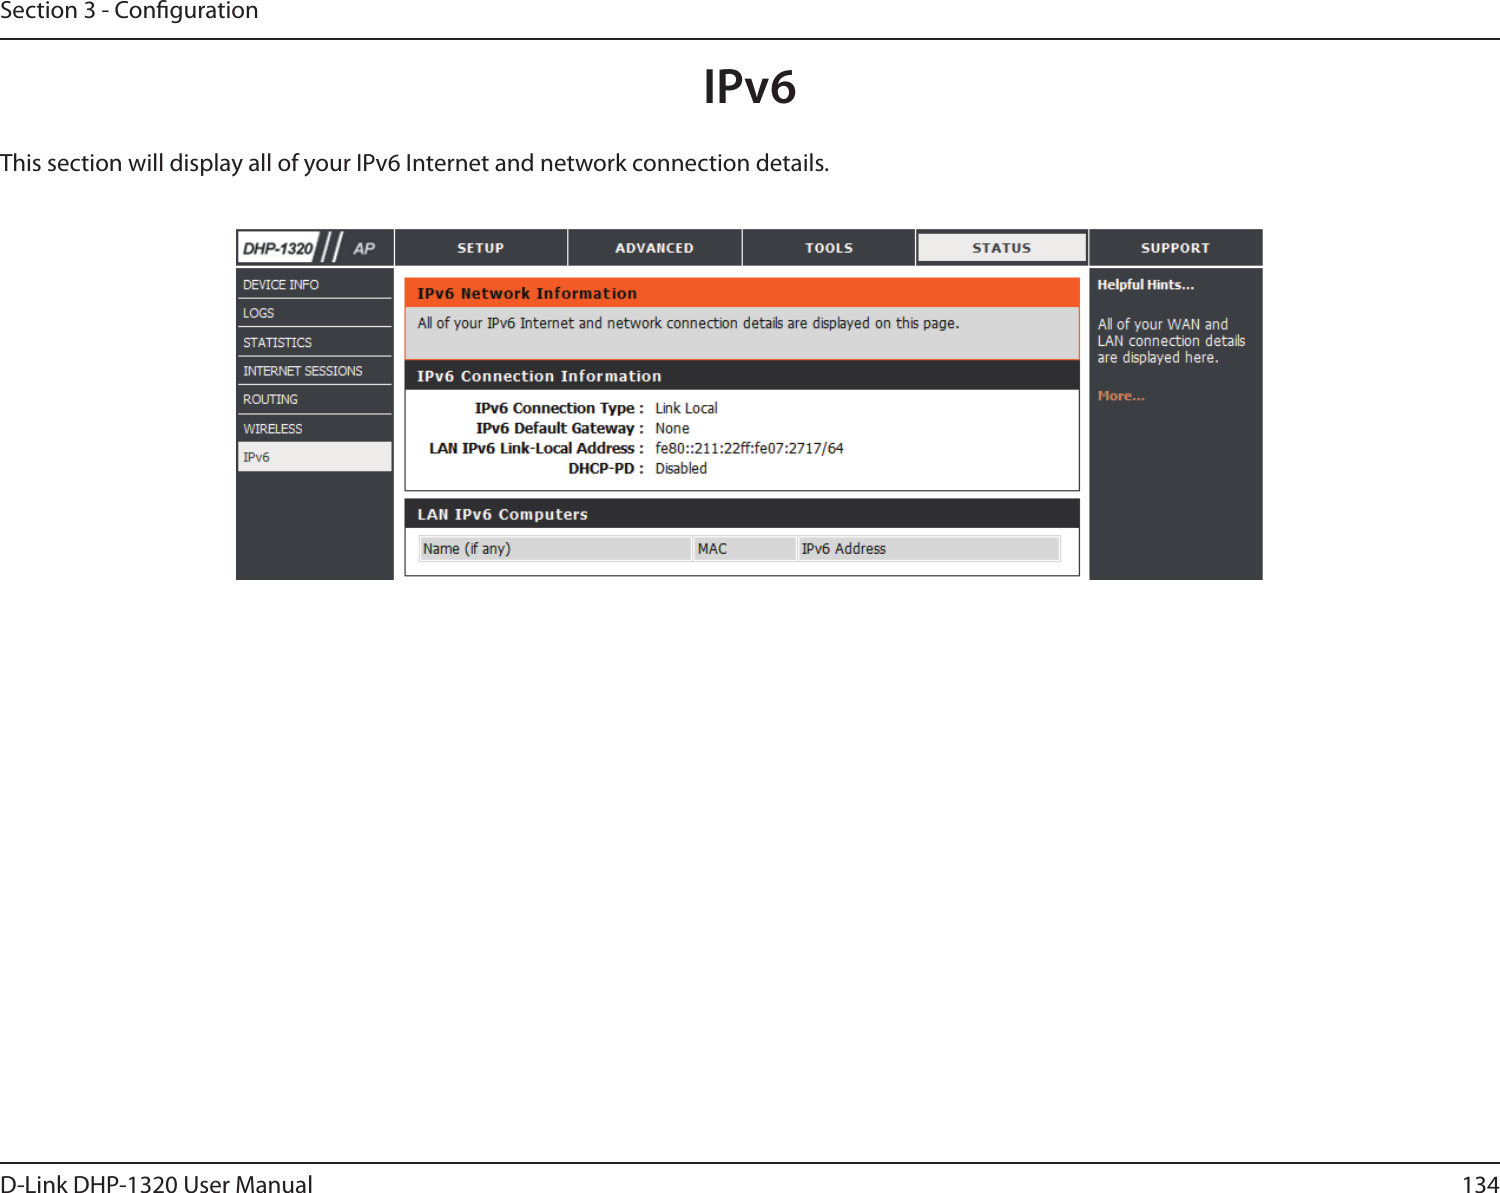 134D-Link DHP-1320 User ManualSection 3 - CongurationIPv6This section will display all of your IPv6 Internet and network connection details. 